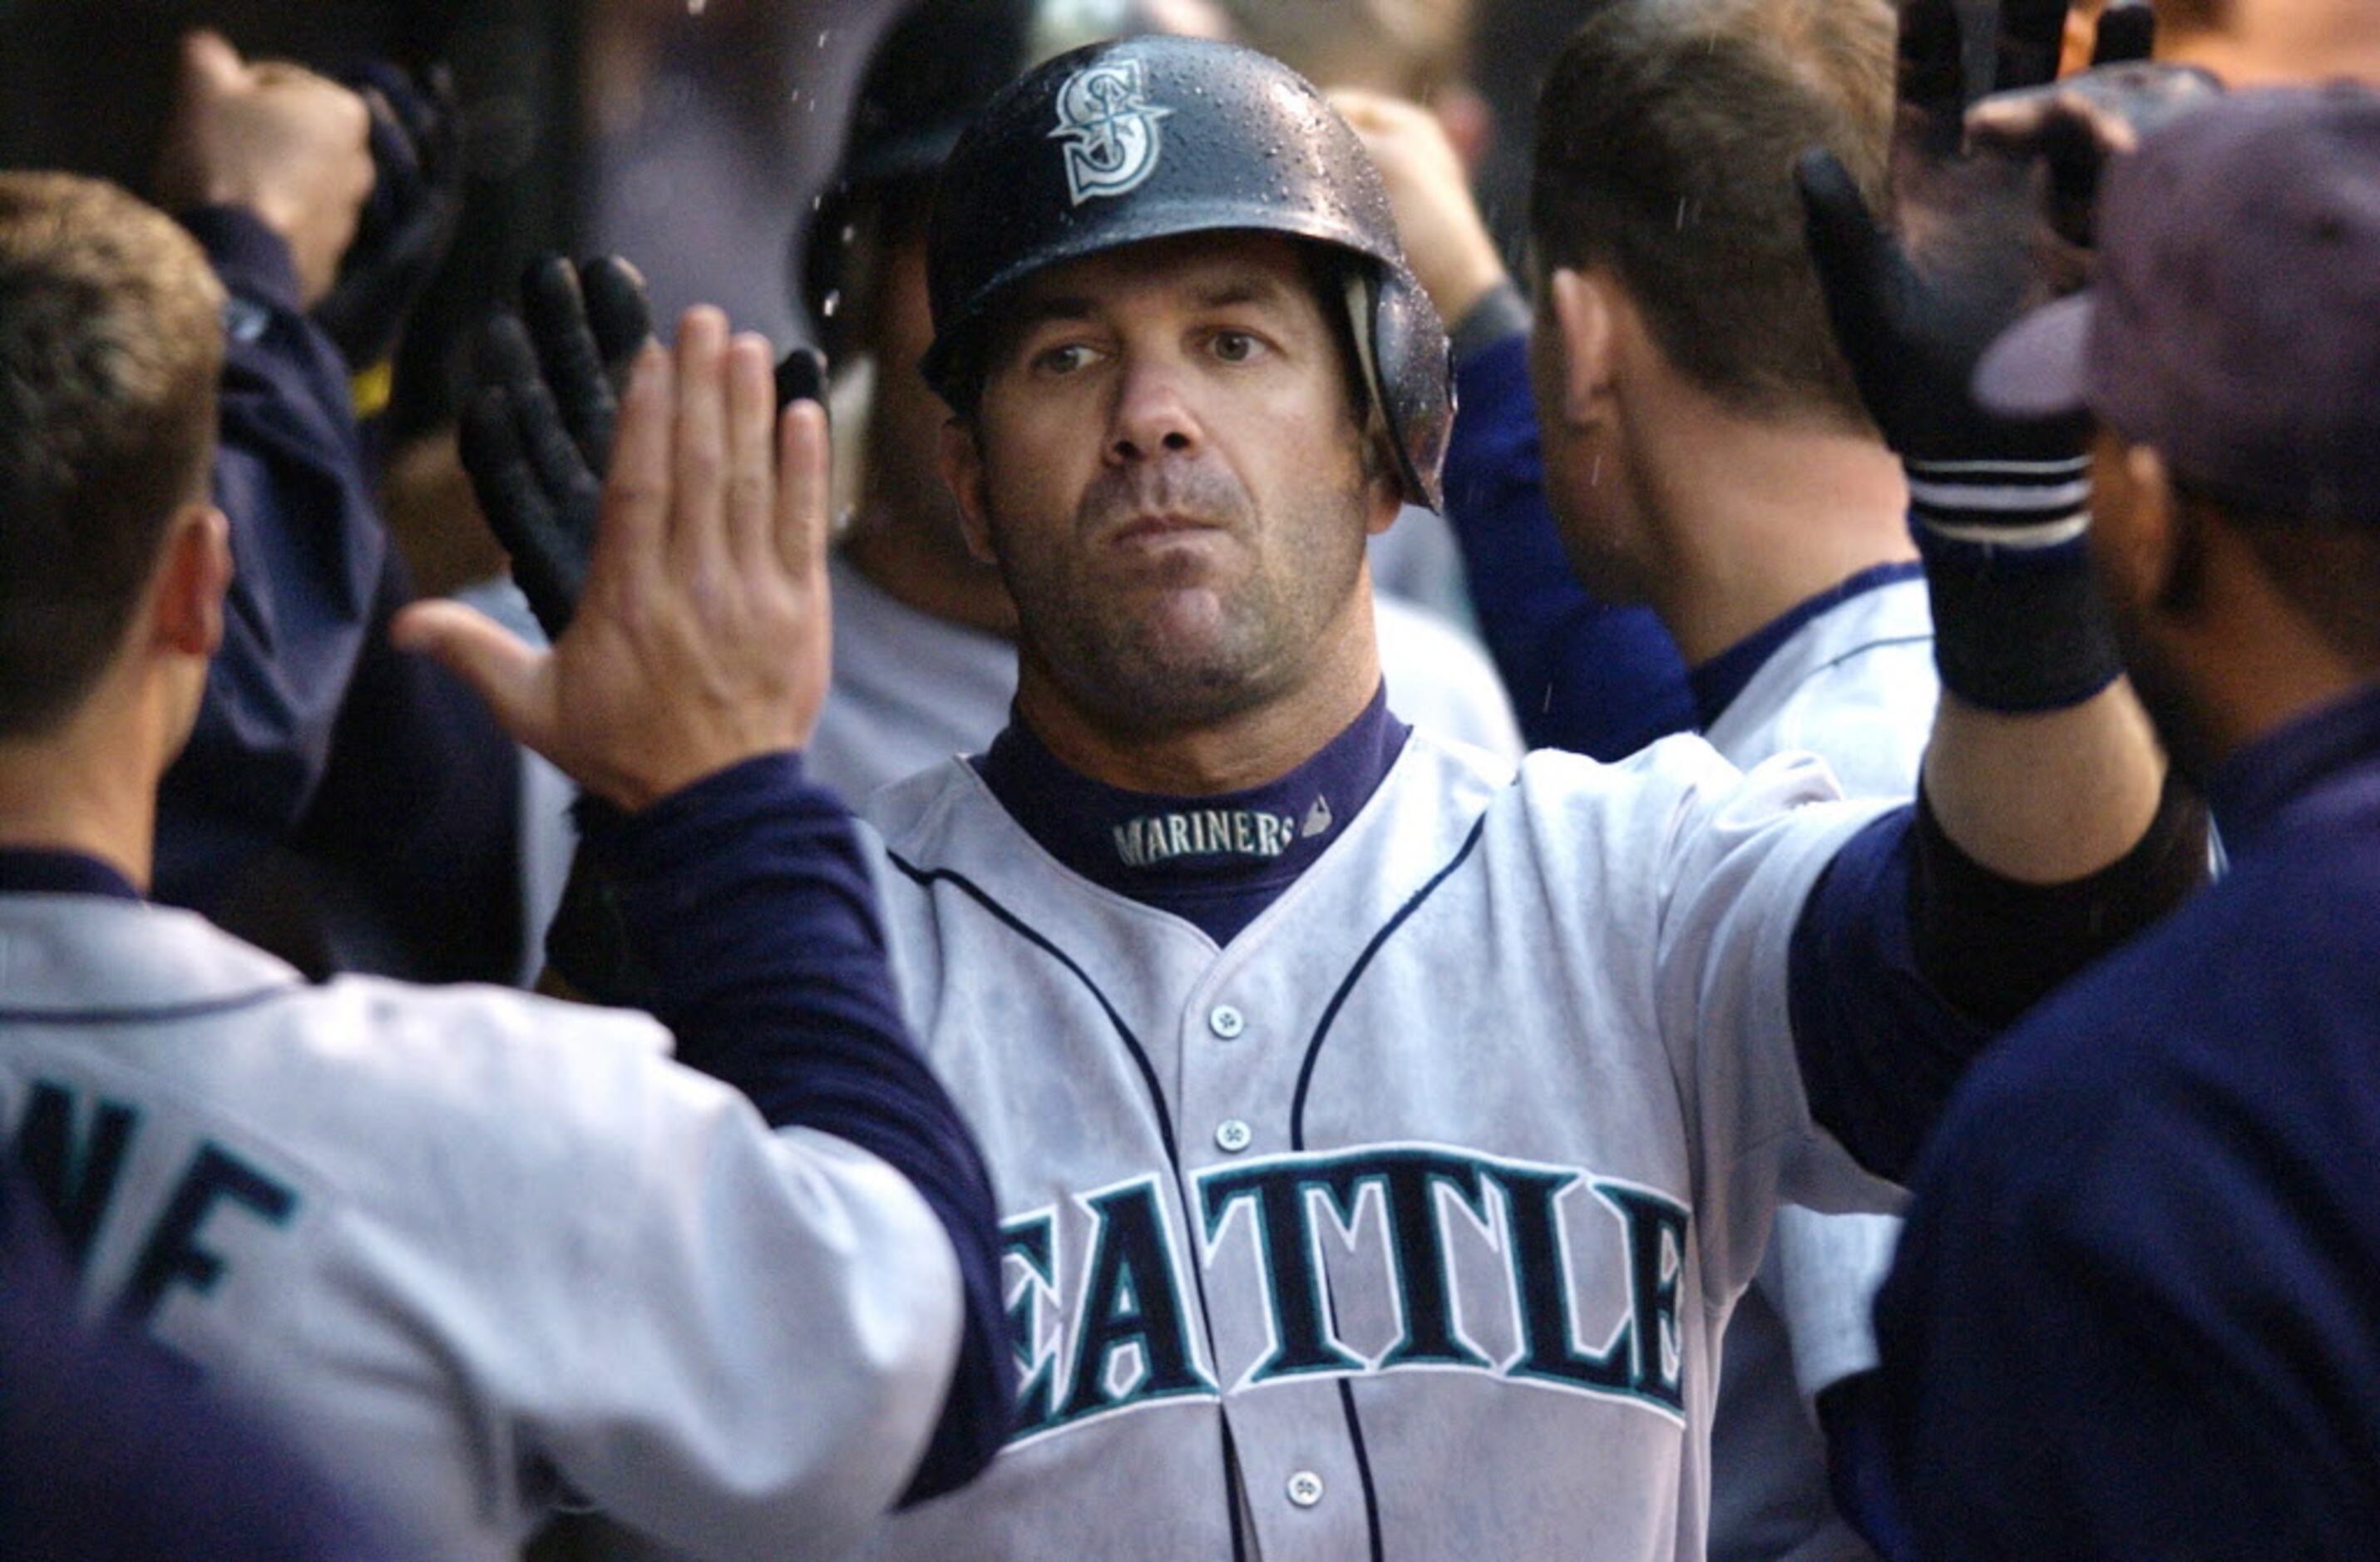 Hall of Fame Candidate Edgar Martinez: By The Numbers